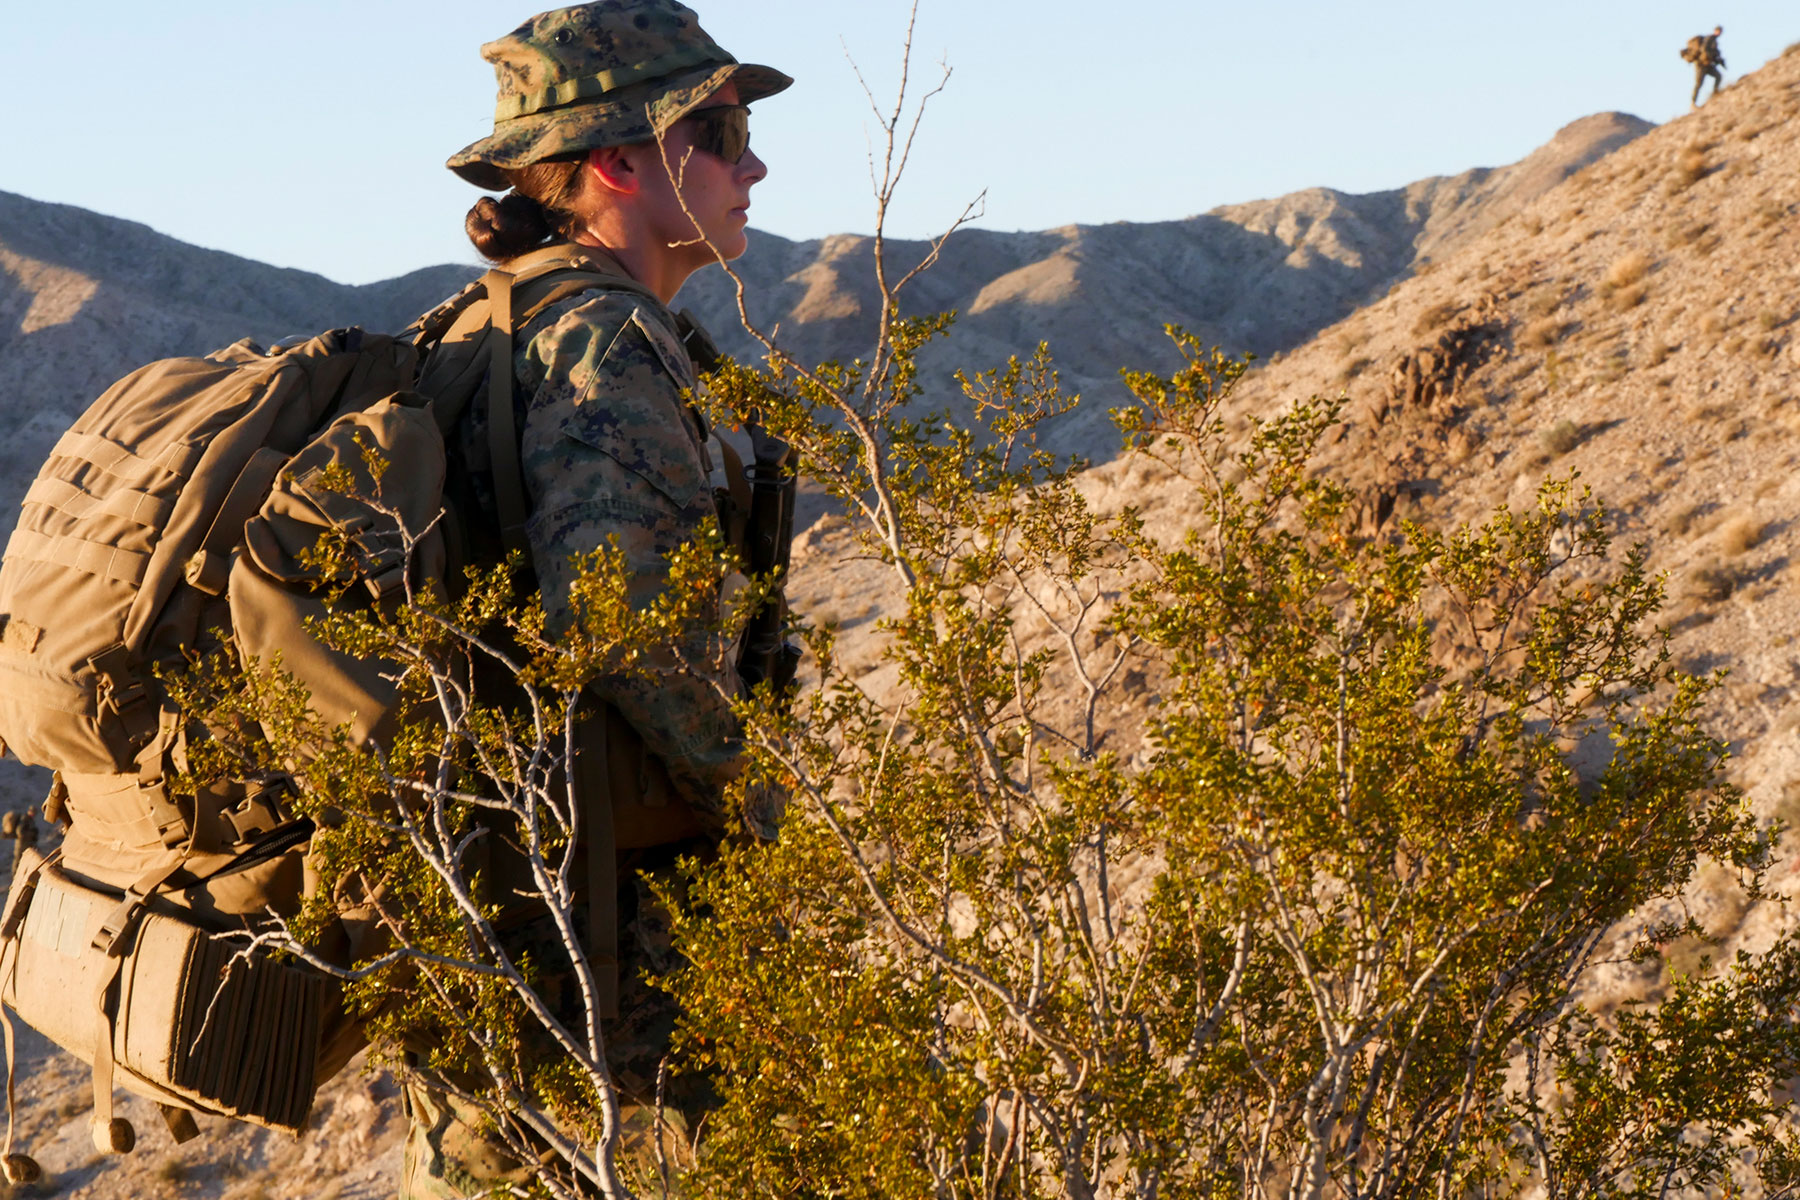 This unnamed female Marine is the first to graduate the Corps’ Infantry Officer Course at Marine Corps Air Ground Combat Center Twentynine Palms, California. She graduated Sept. 25, 2017. (U.S. Marine Corps/Gregory Boyd)